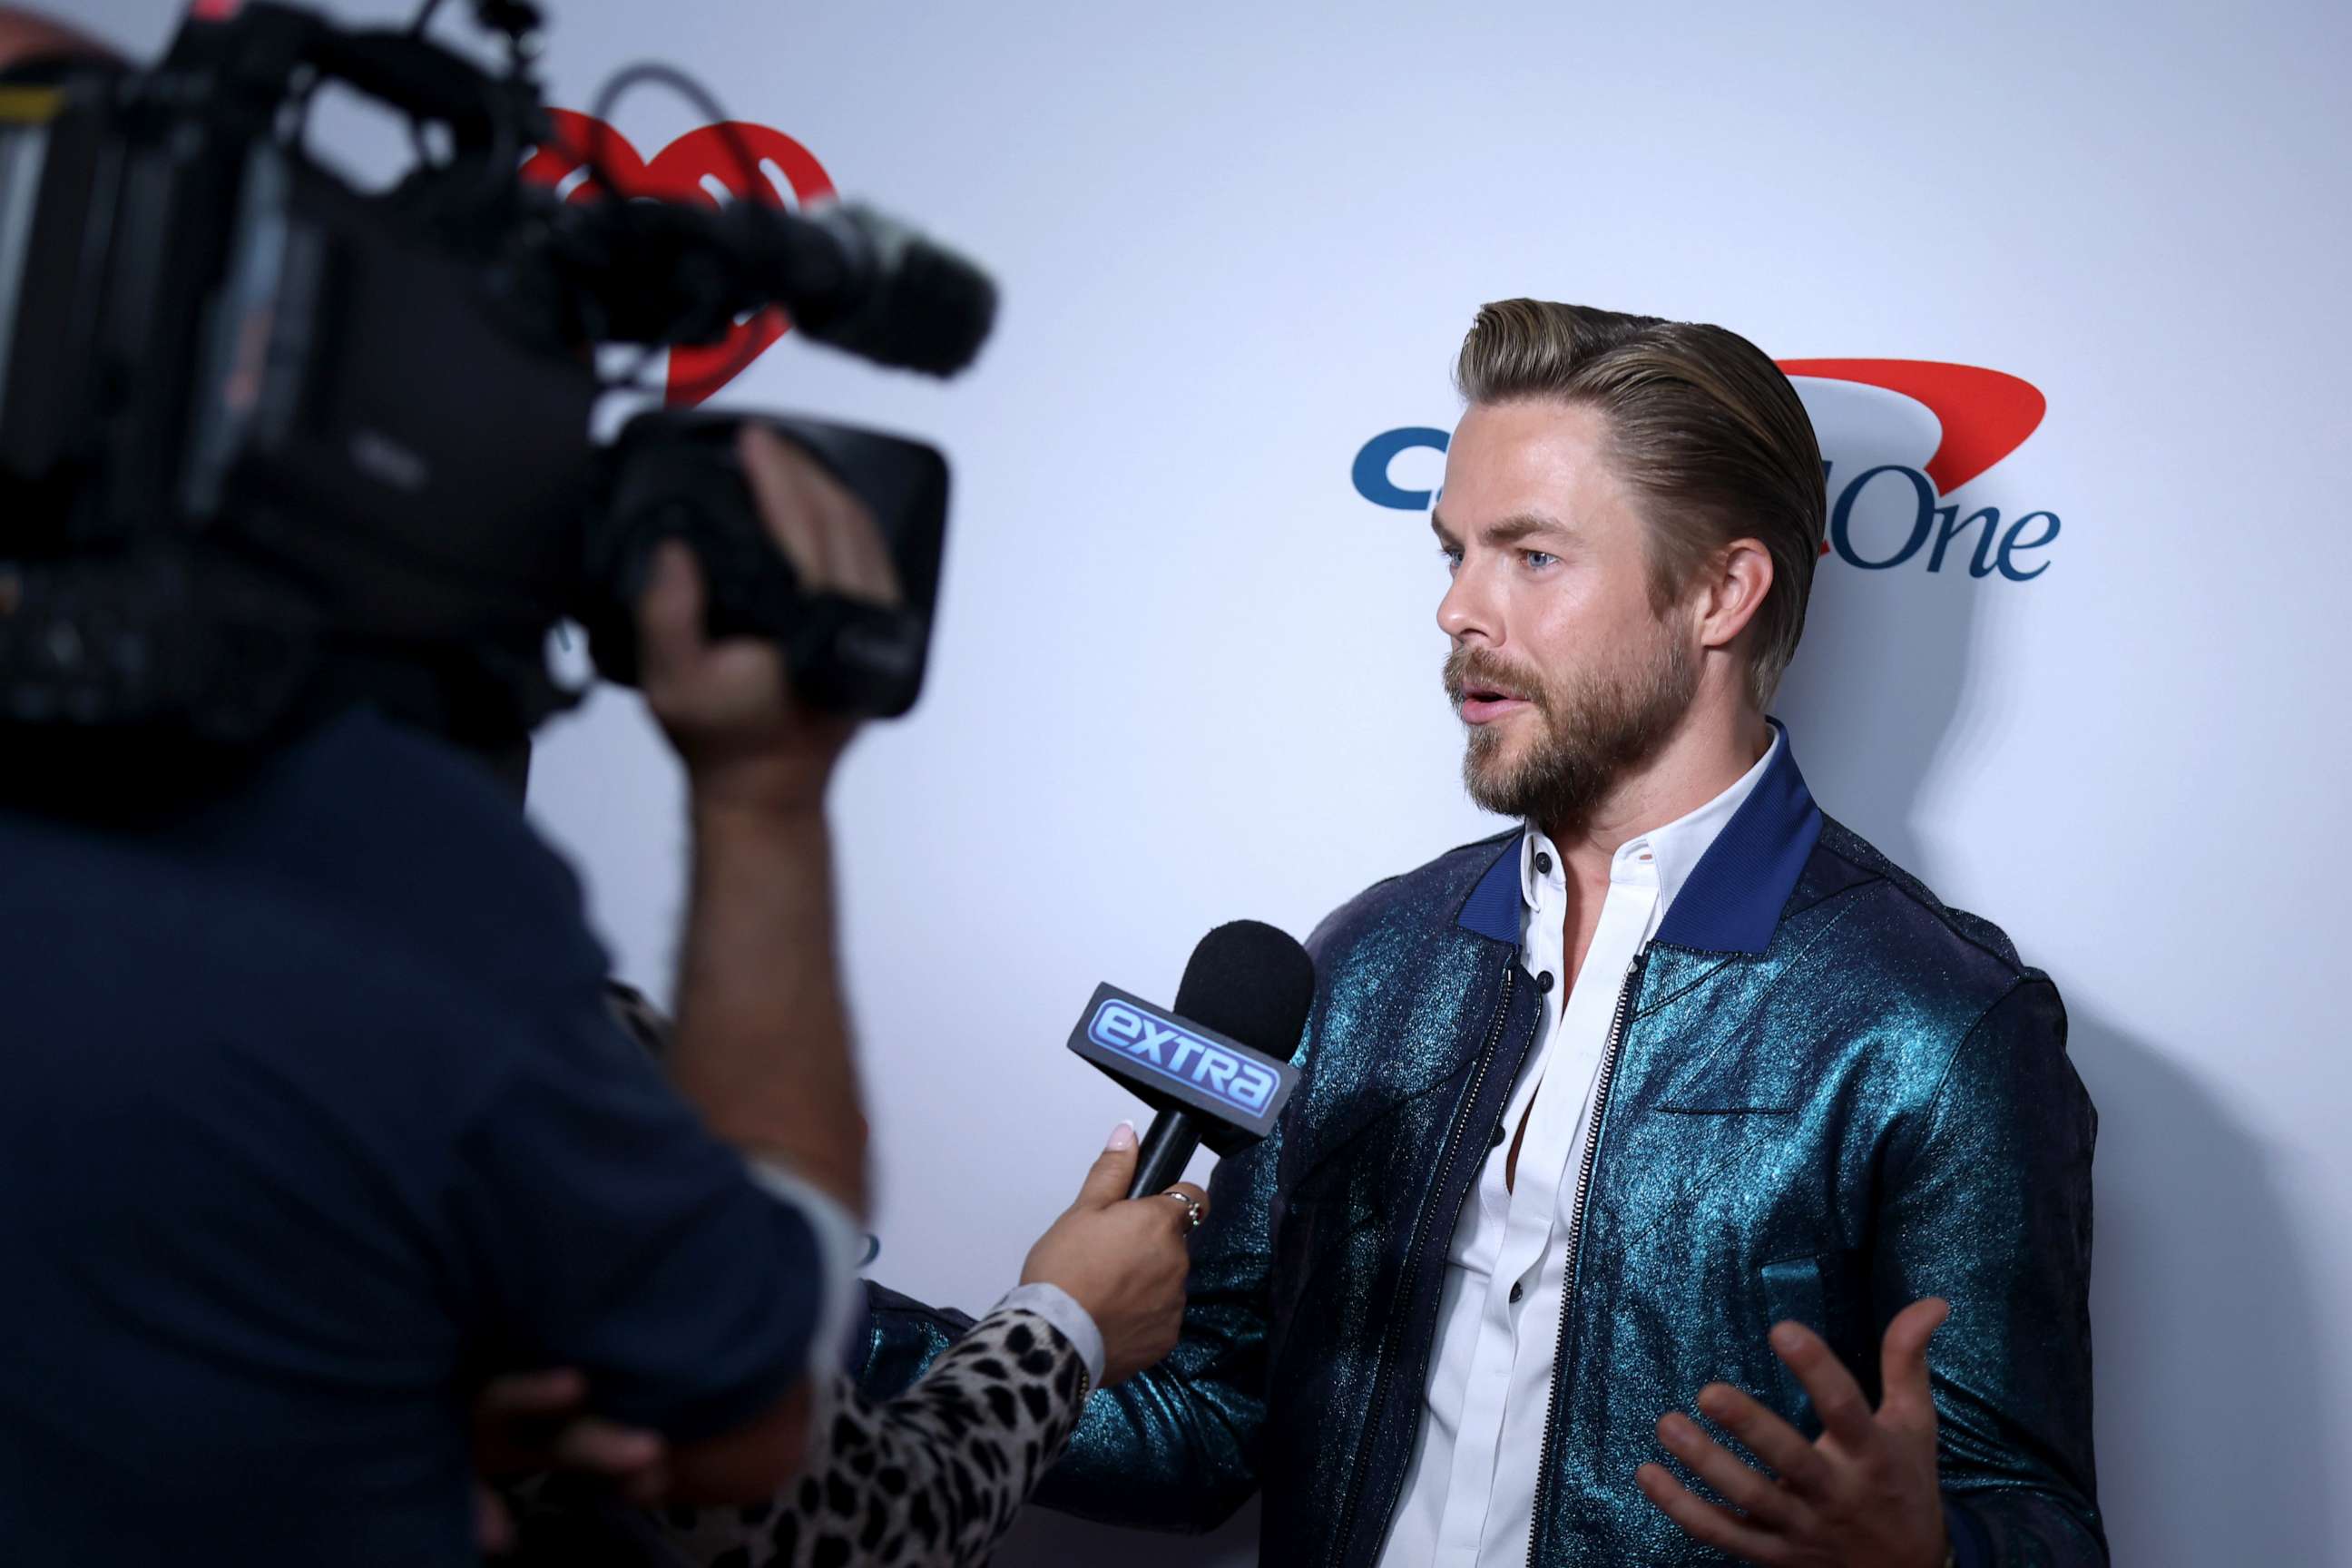 PHOTO: Derek Hough at the 2021 iHeartRadio Music Festival, Sept. 18, 2021, at T-Mobile Arena in Las Vegas.